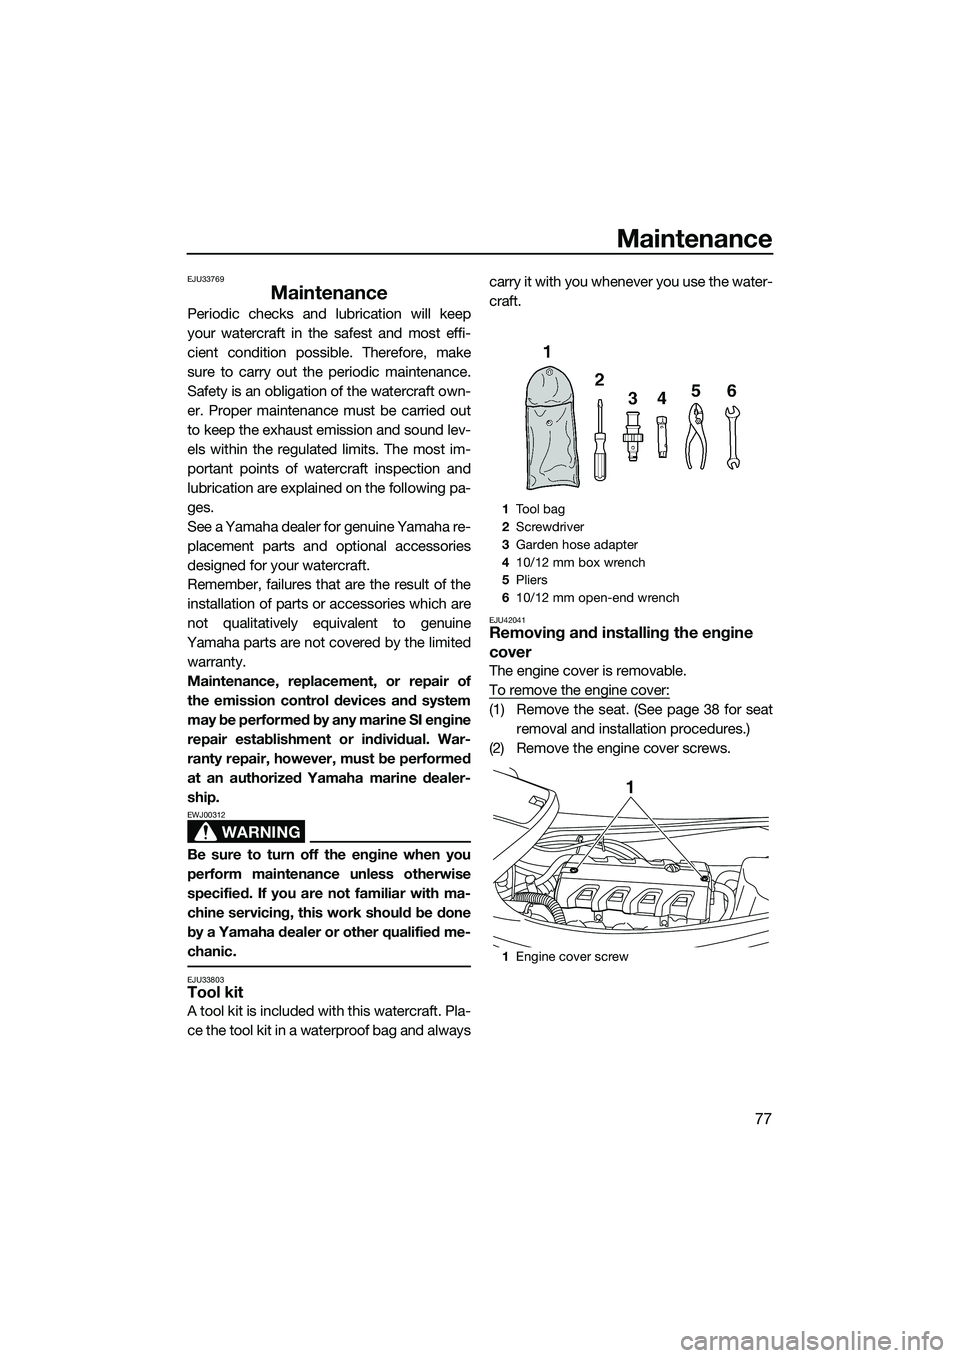 YAMAHA VXR 2014  Owners Manual Maintenance
77
EJU33769
Maintenance
Periodic checks and lubrication will keep
your watercraft in the safest and most effi-
cient condition possible. Therefore, make
sure to carry out the periodic main